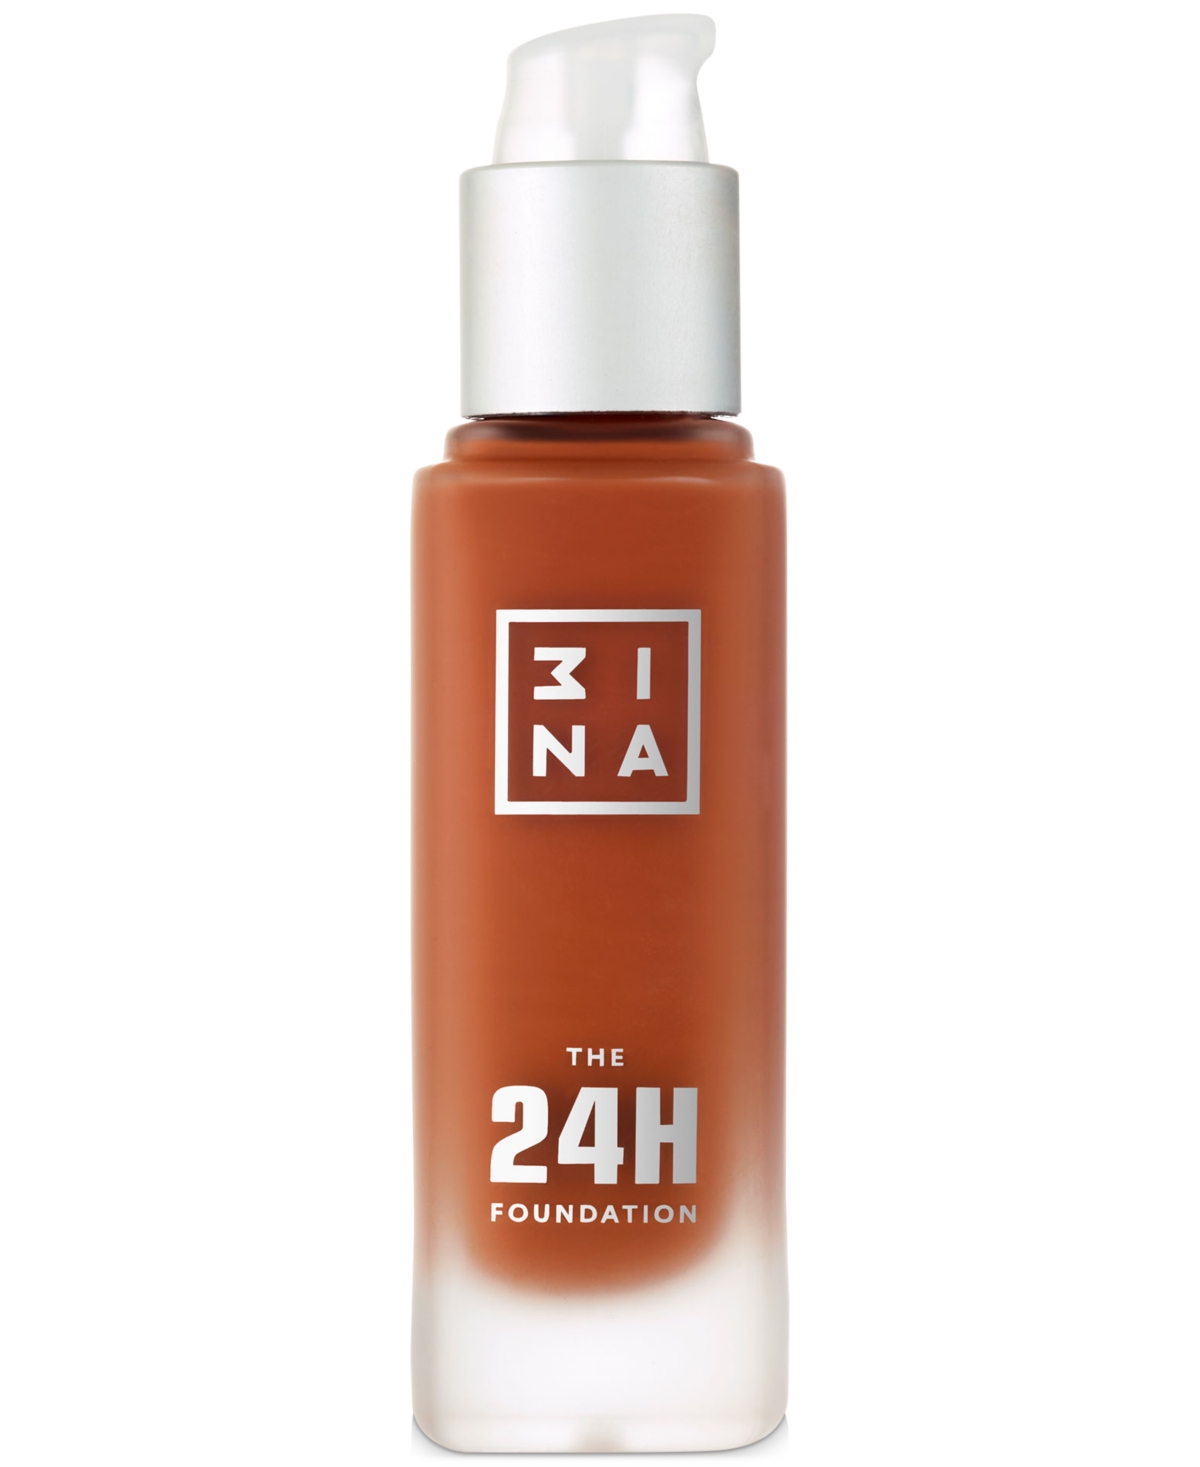 3ina The 24h Foundation In - Grey Brown